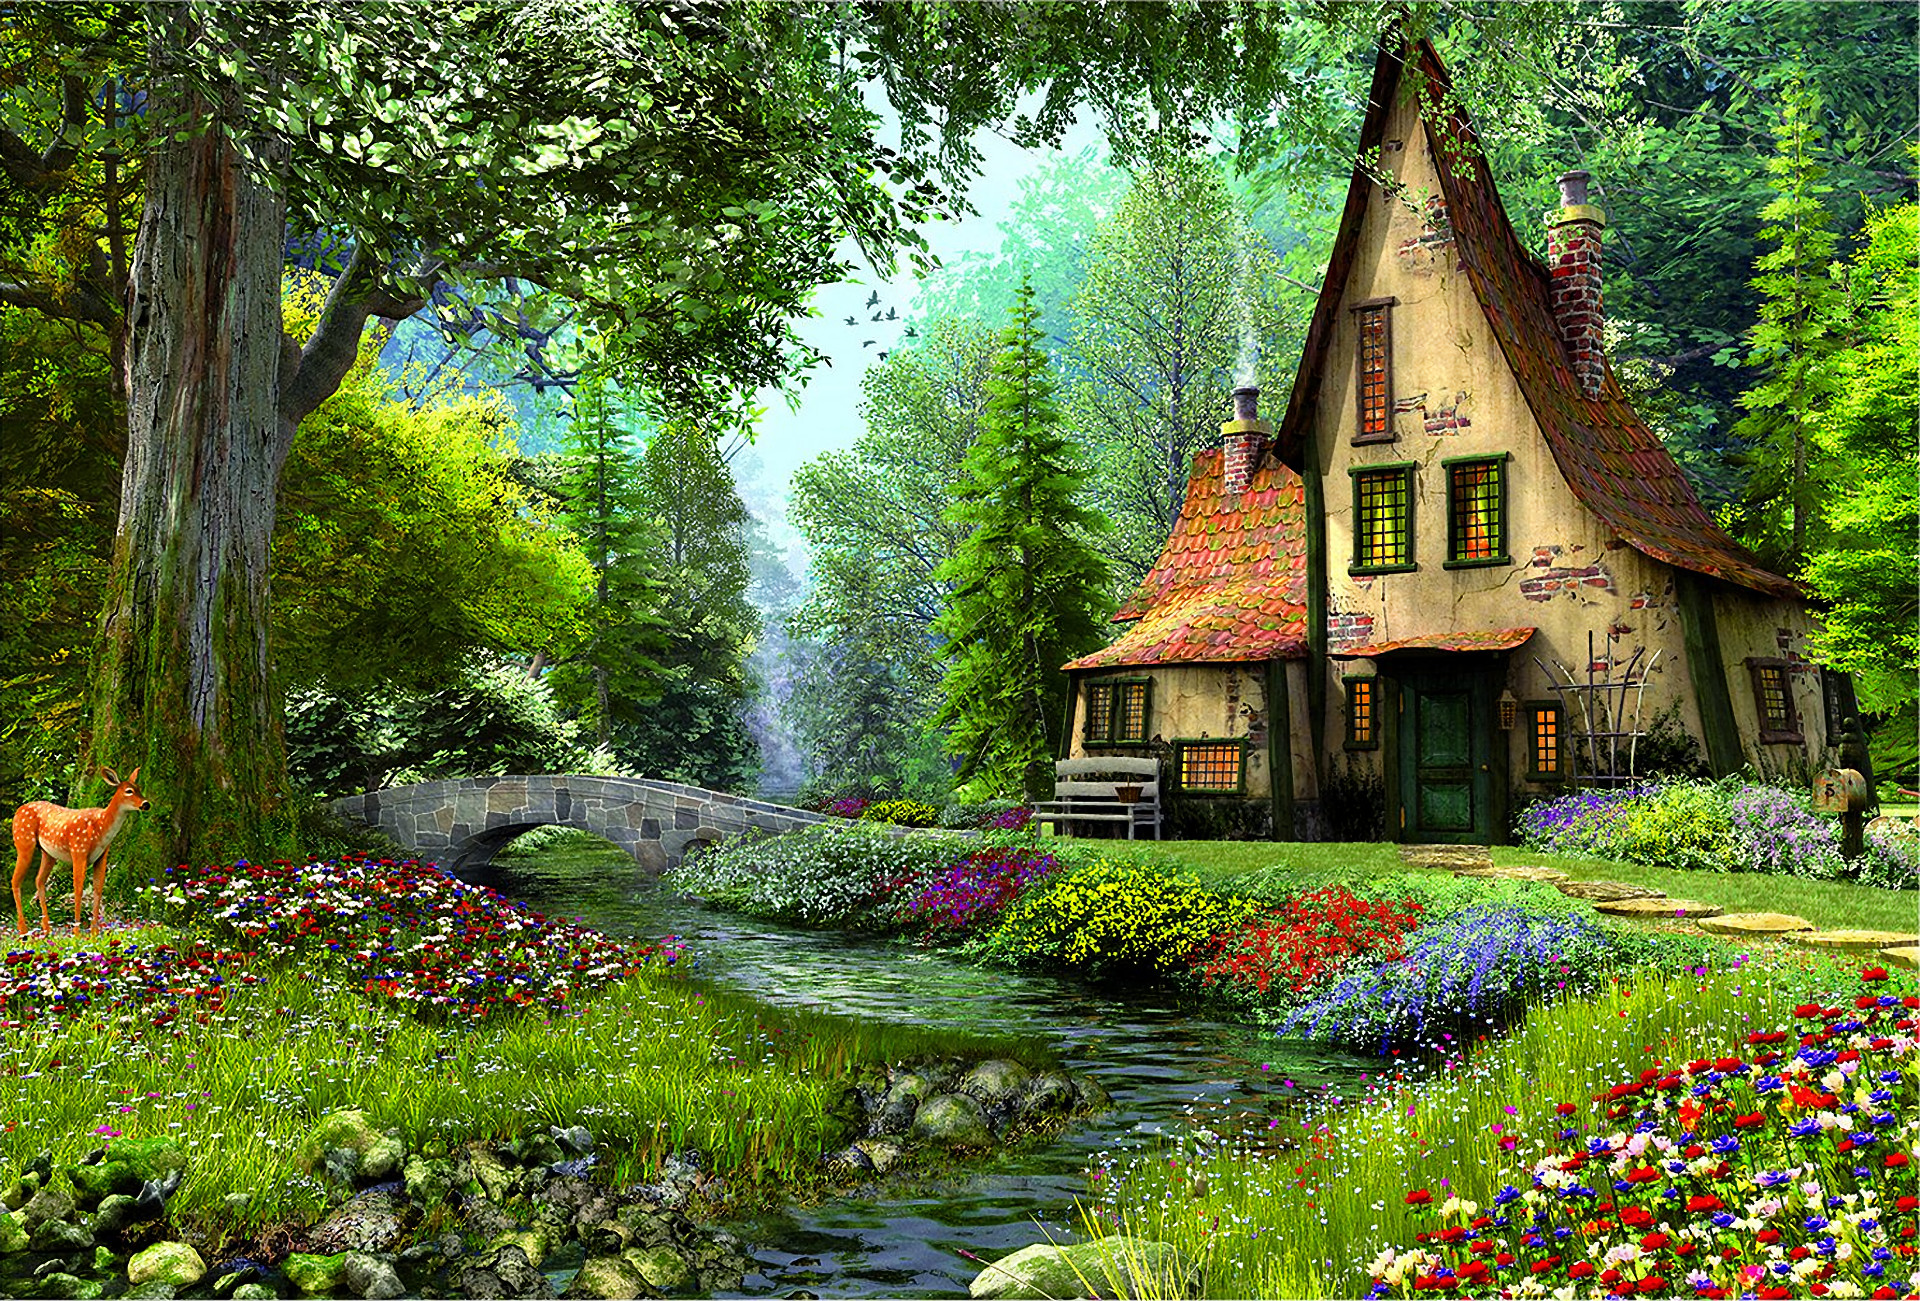 Painting Artistic House Fairy Tale Magical Flower Tree - Fairytale House In Forest - HD Wallpaper 